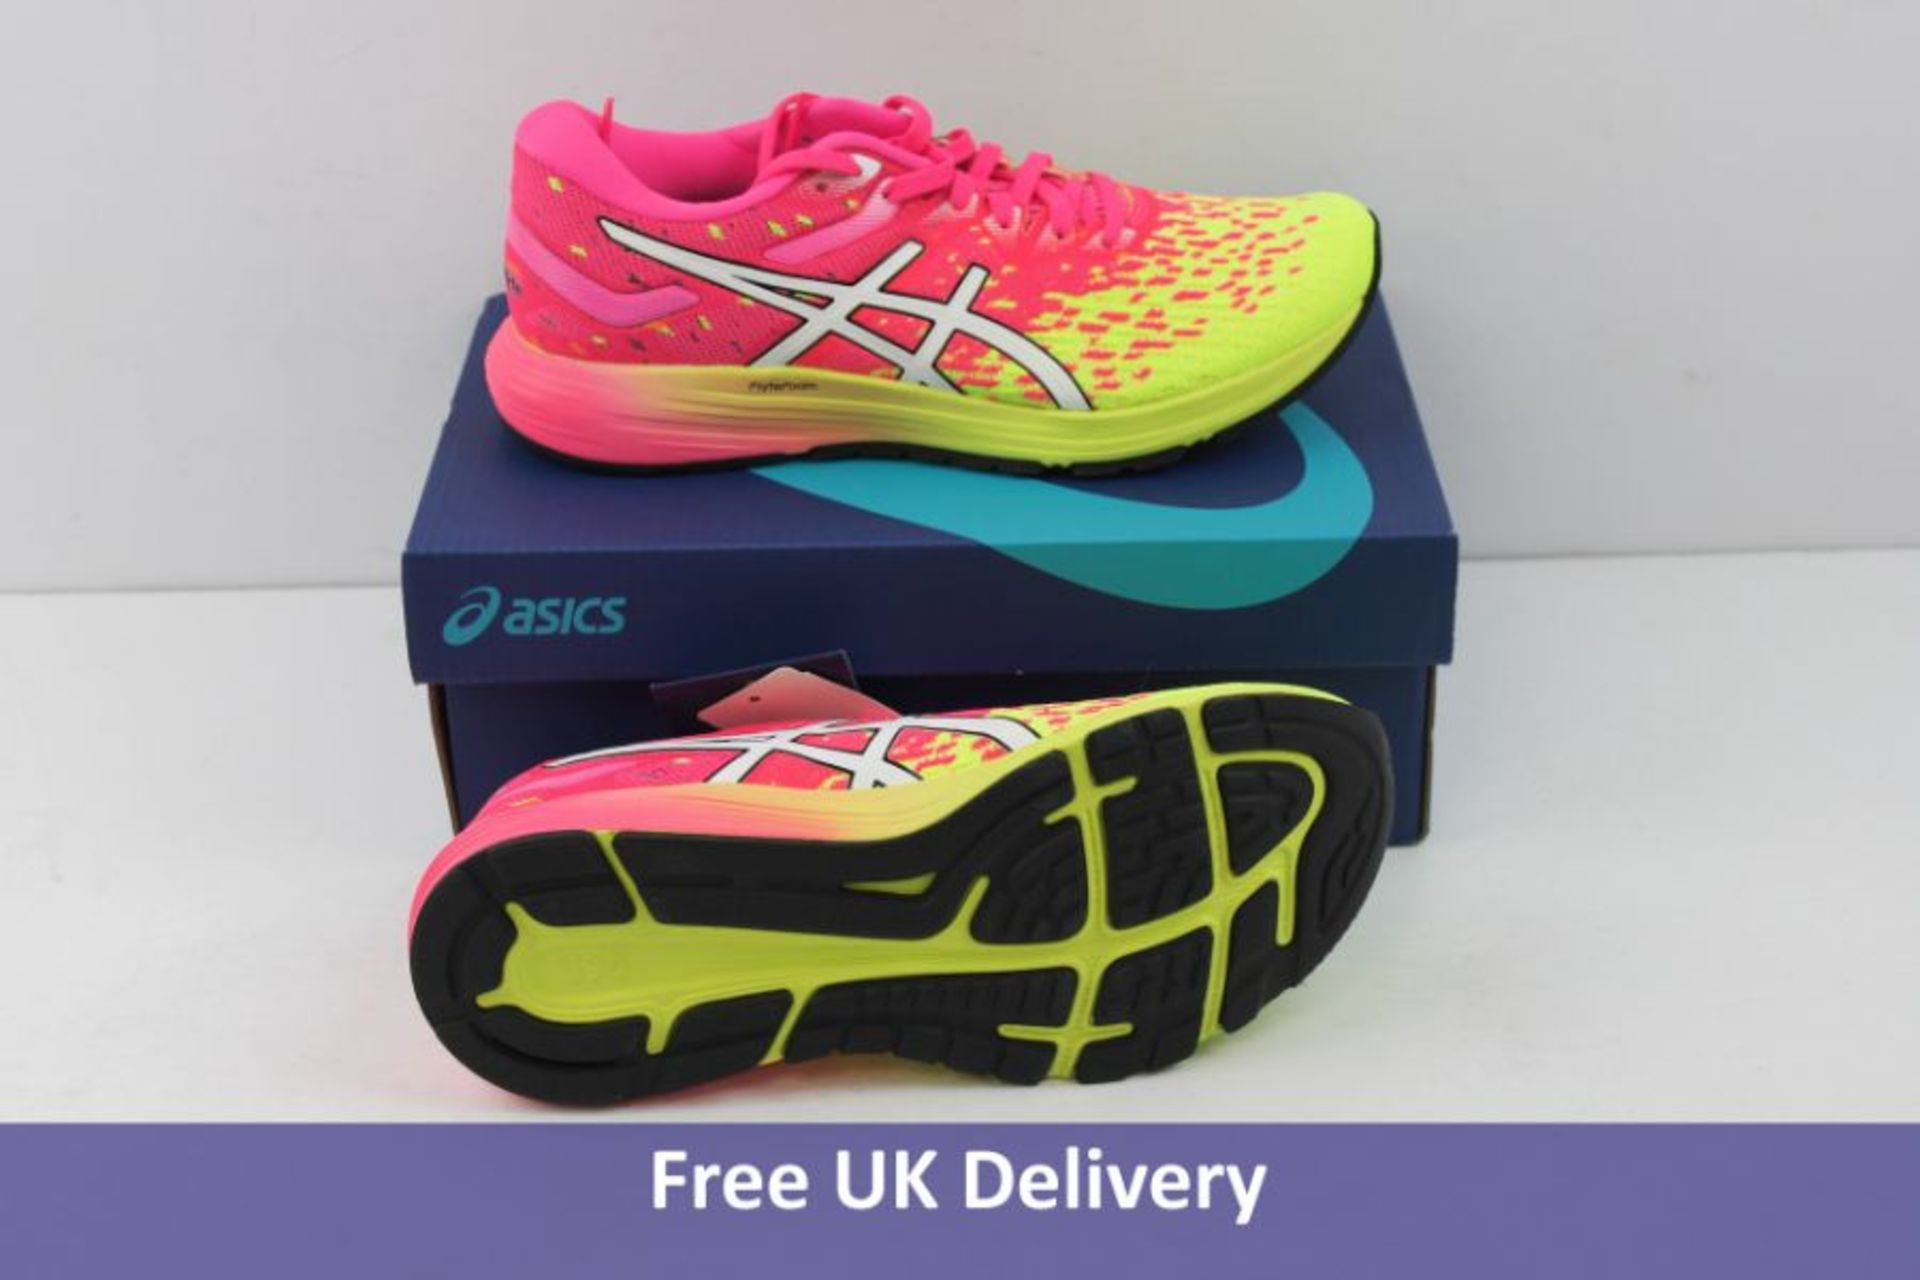 Asics Women's Dynaflyte 4 Trainers, Hot Pink and White, UK 5.5